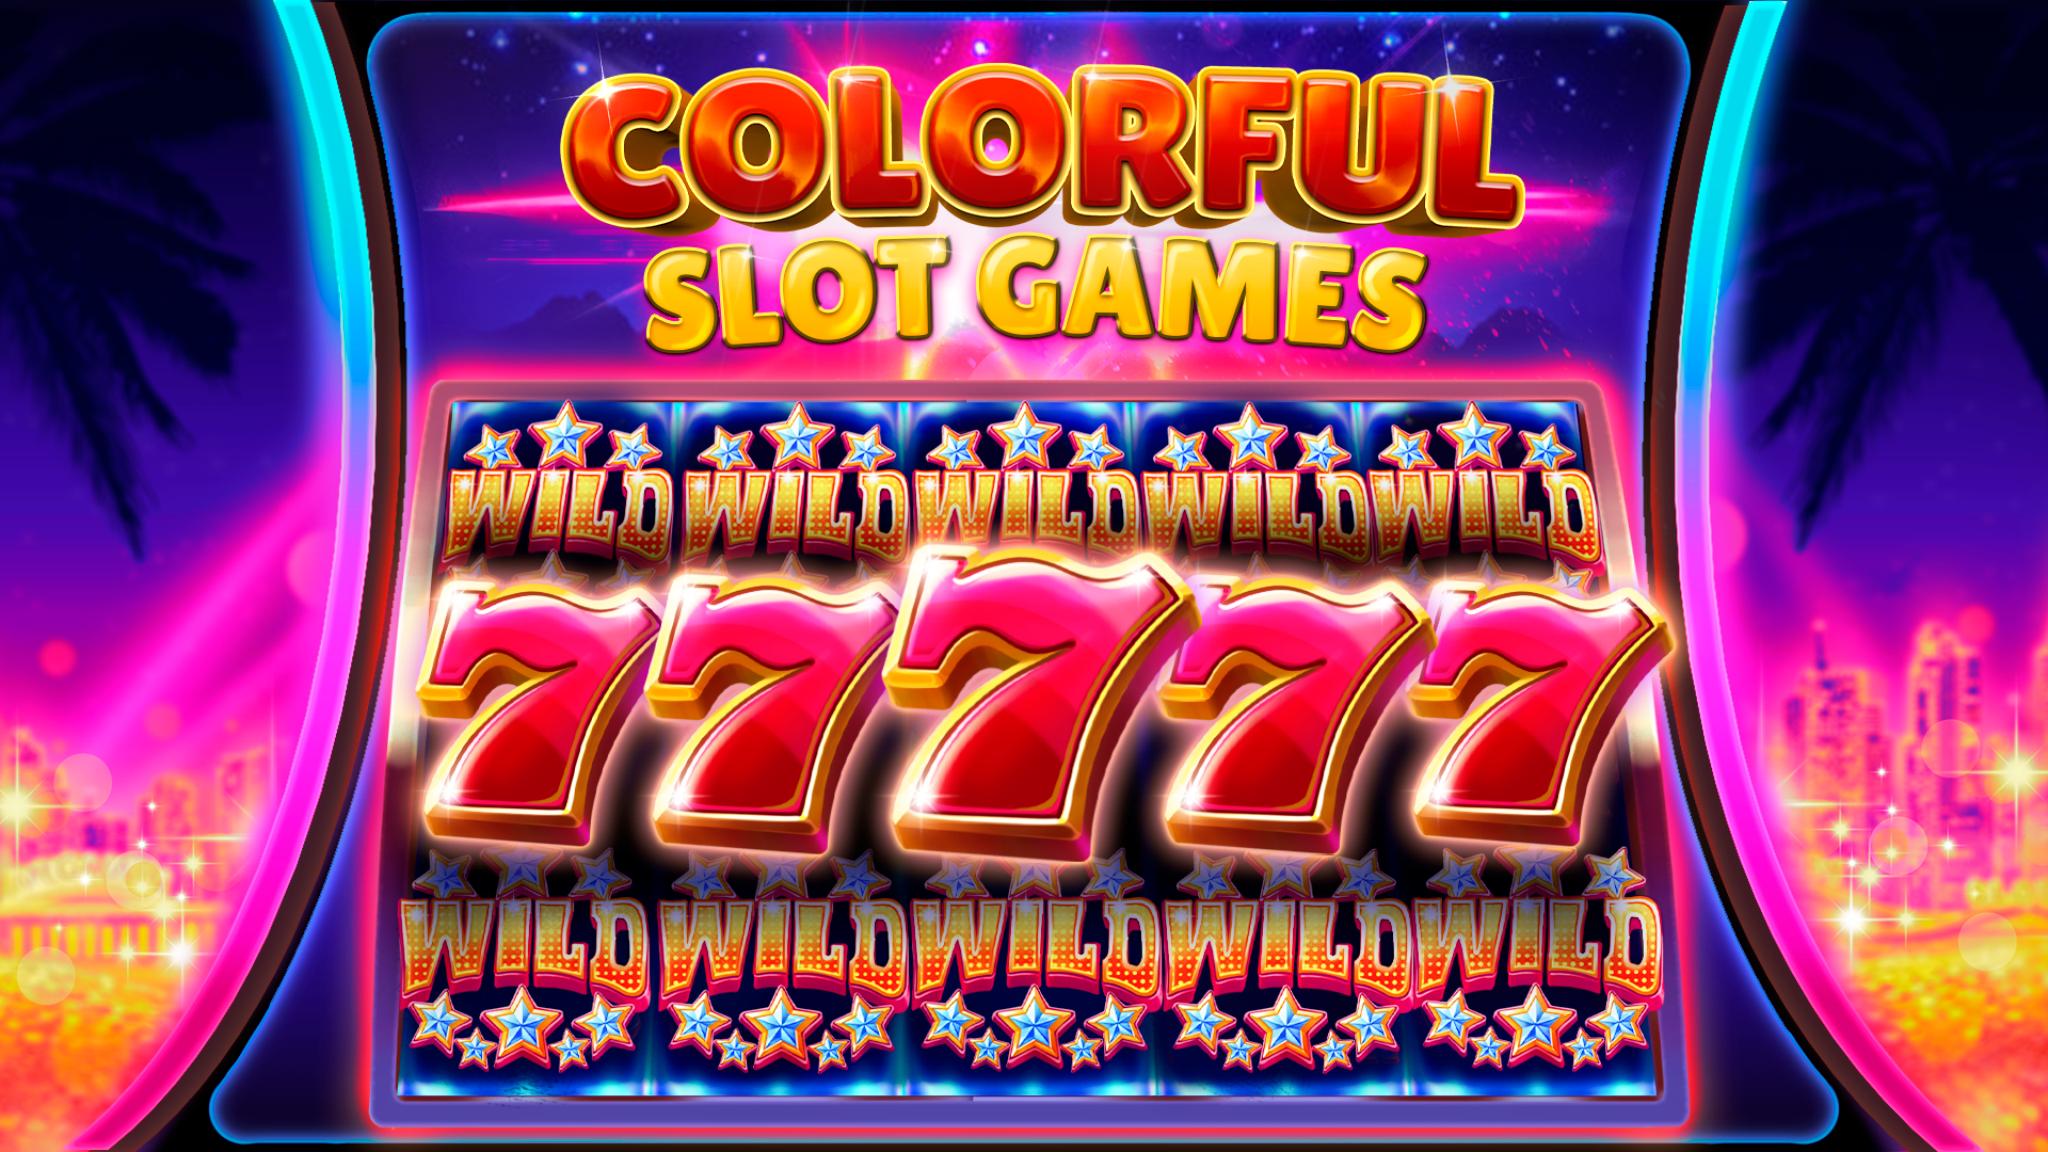 Play online slots like a professional,